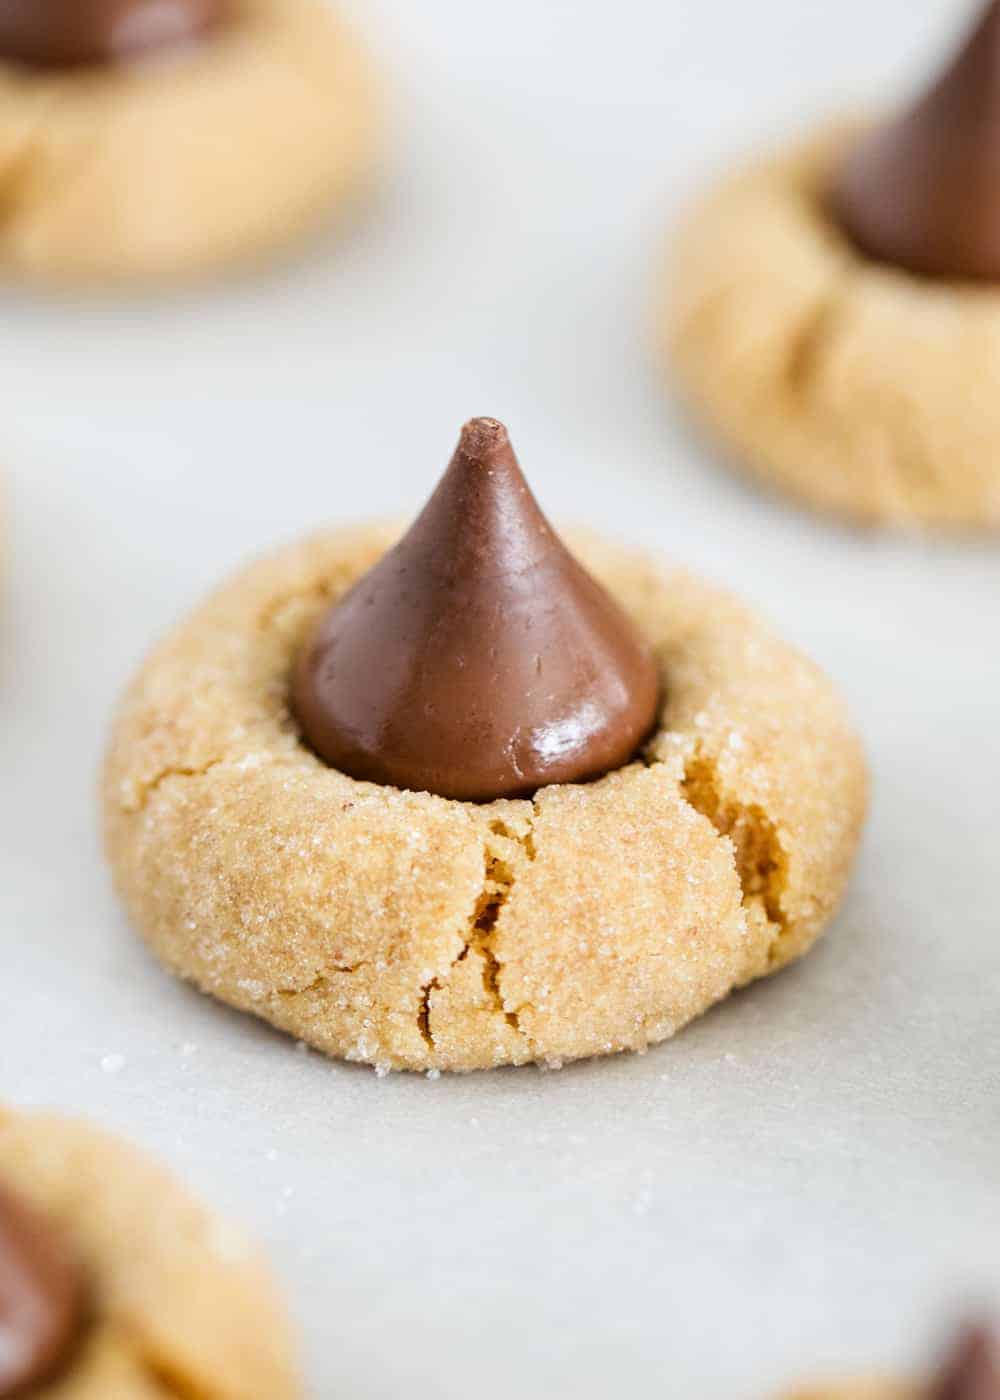 Peanut butter cookie with chocolate kiss on top.